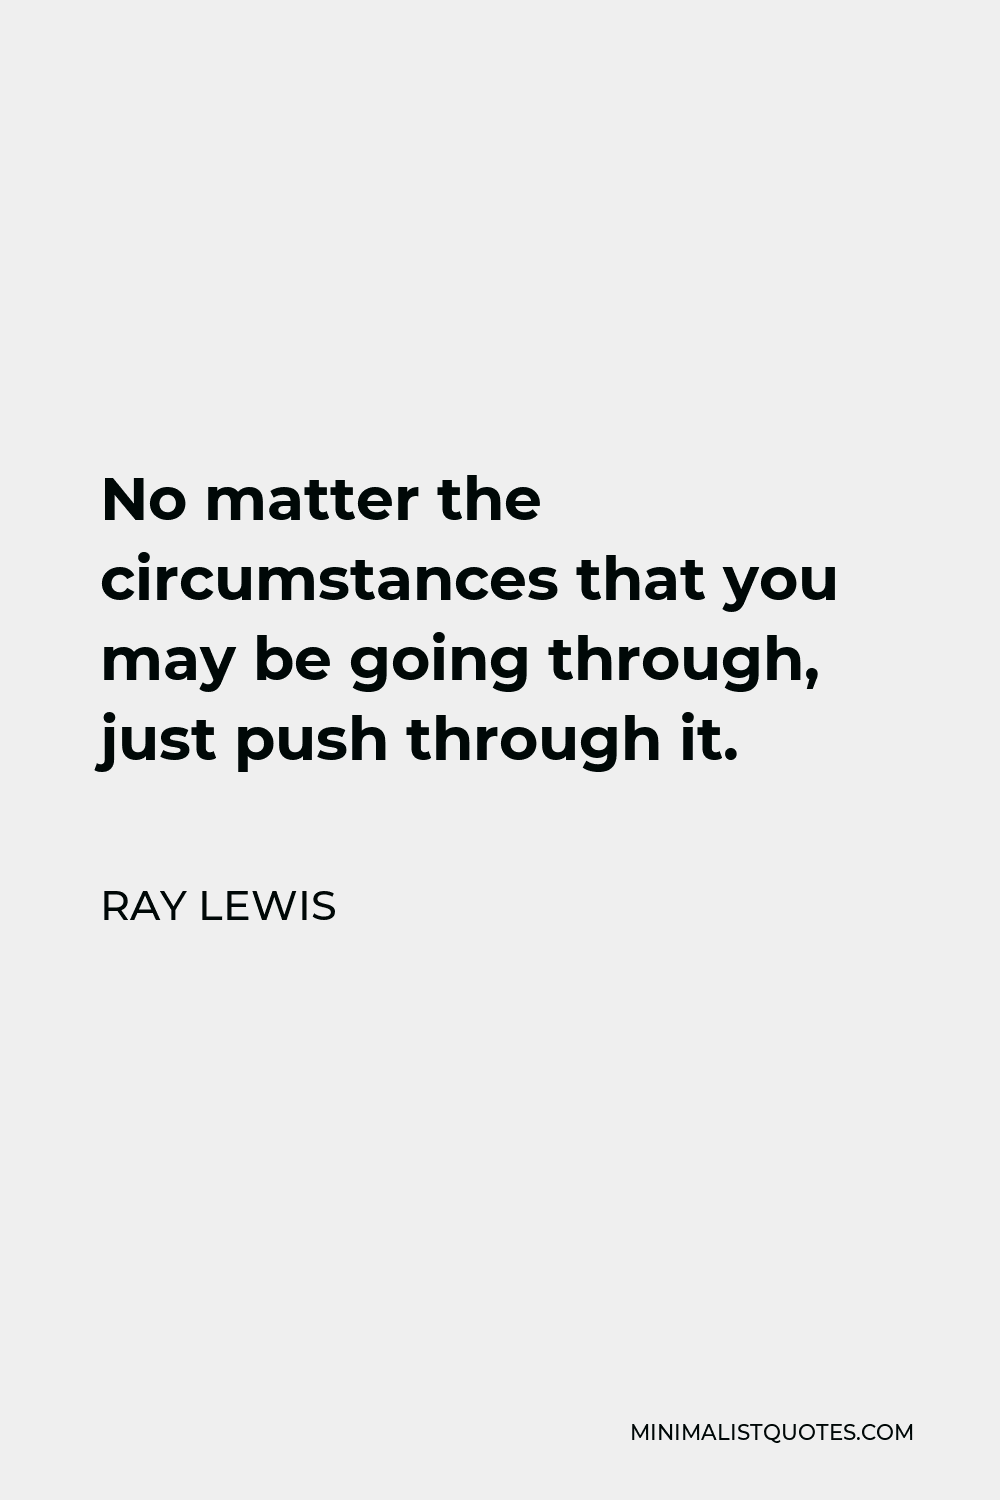 Ray Lewis Quote - No matter the circumstances that you may be going through, just push through it.